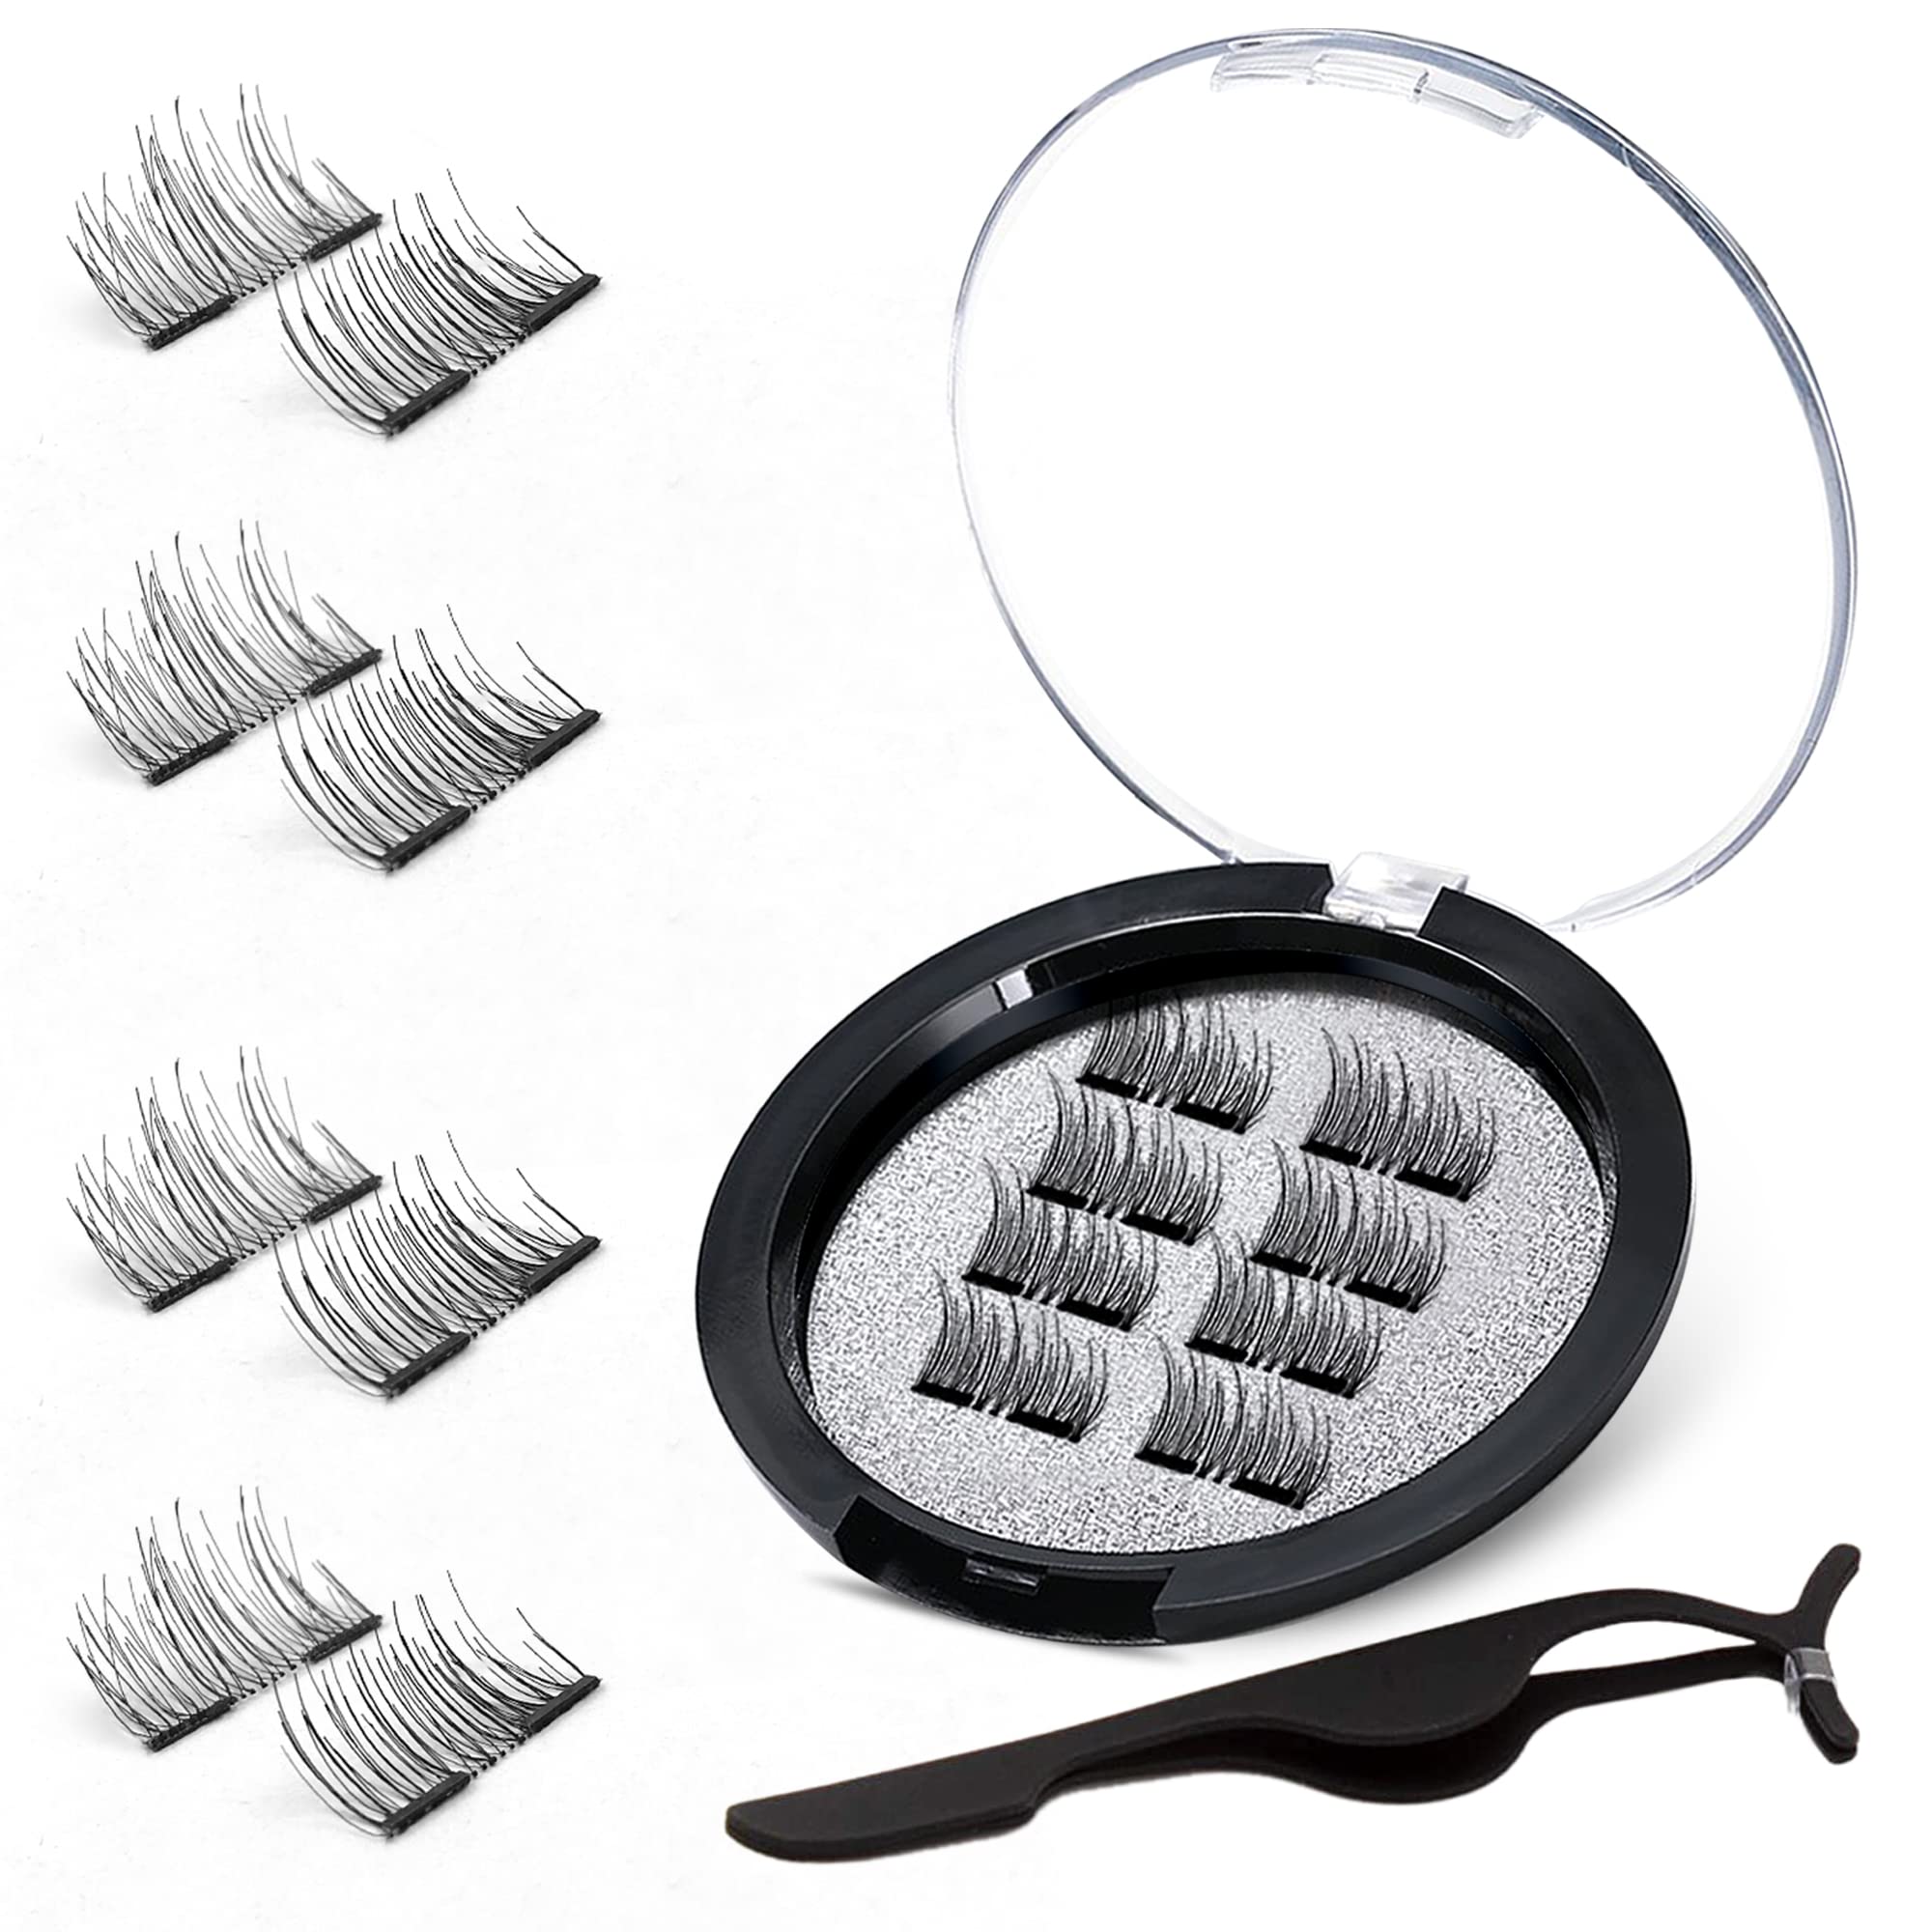 VASSOUL Dual Magnetic Eyelashes, 0.2mm Ultra Thin Magnet, Light weight & Easy to Wear, Best 3D Reusable Eyelashes with Applicator (8 PC with Tweezers)